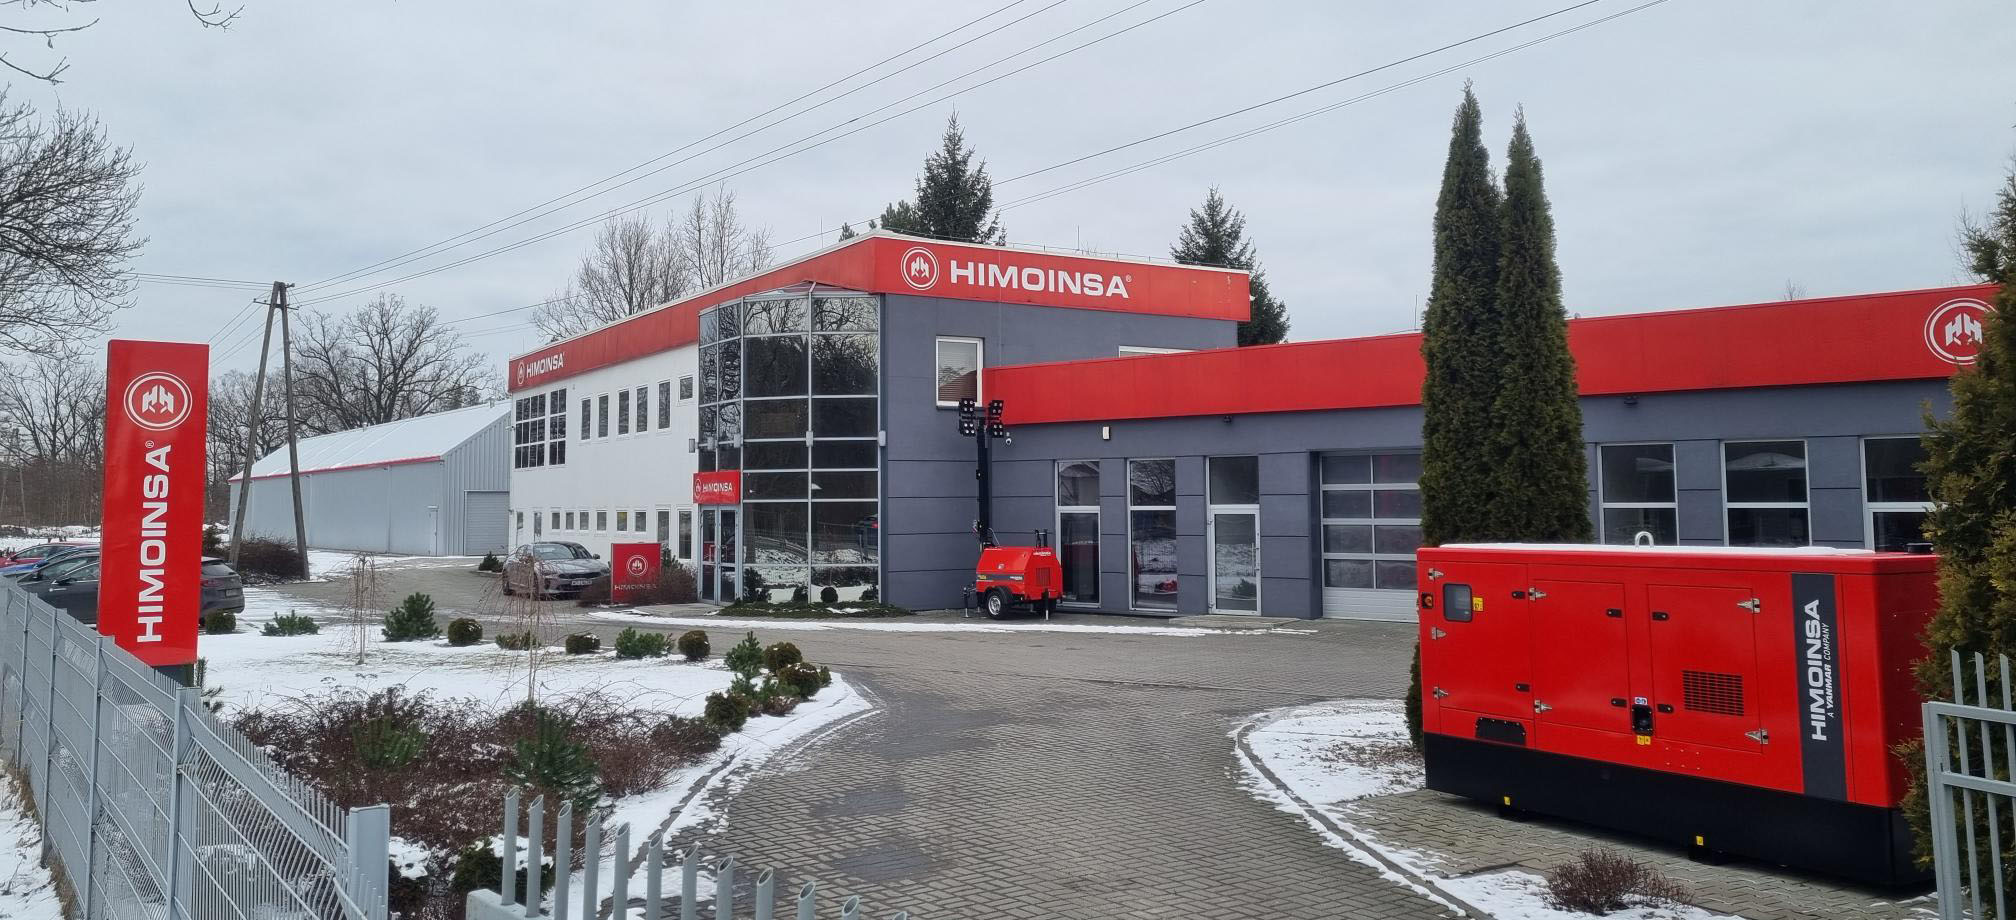 HIMOINSA Poland extends its premises and increases its equipment storage and distribution capacity